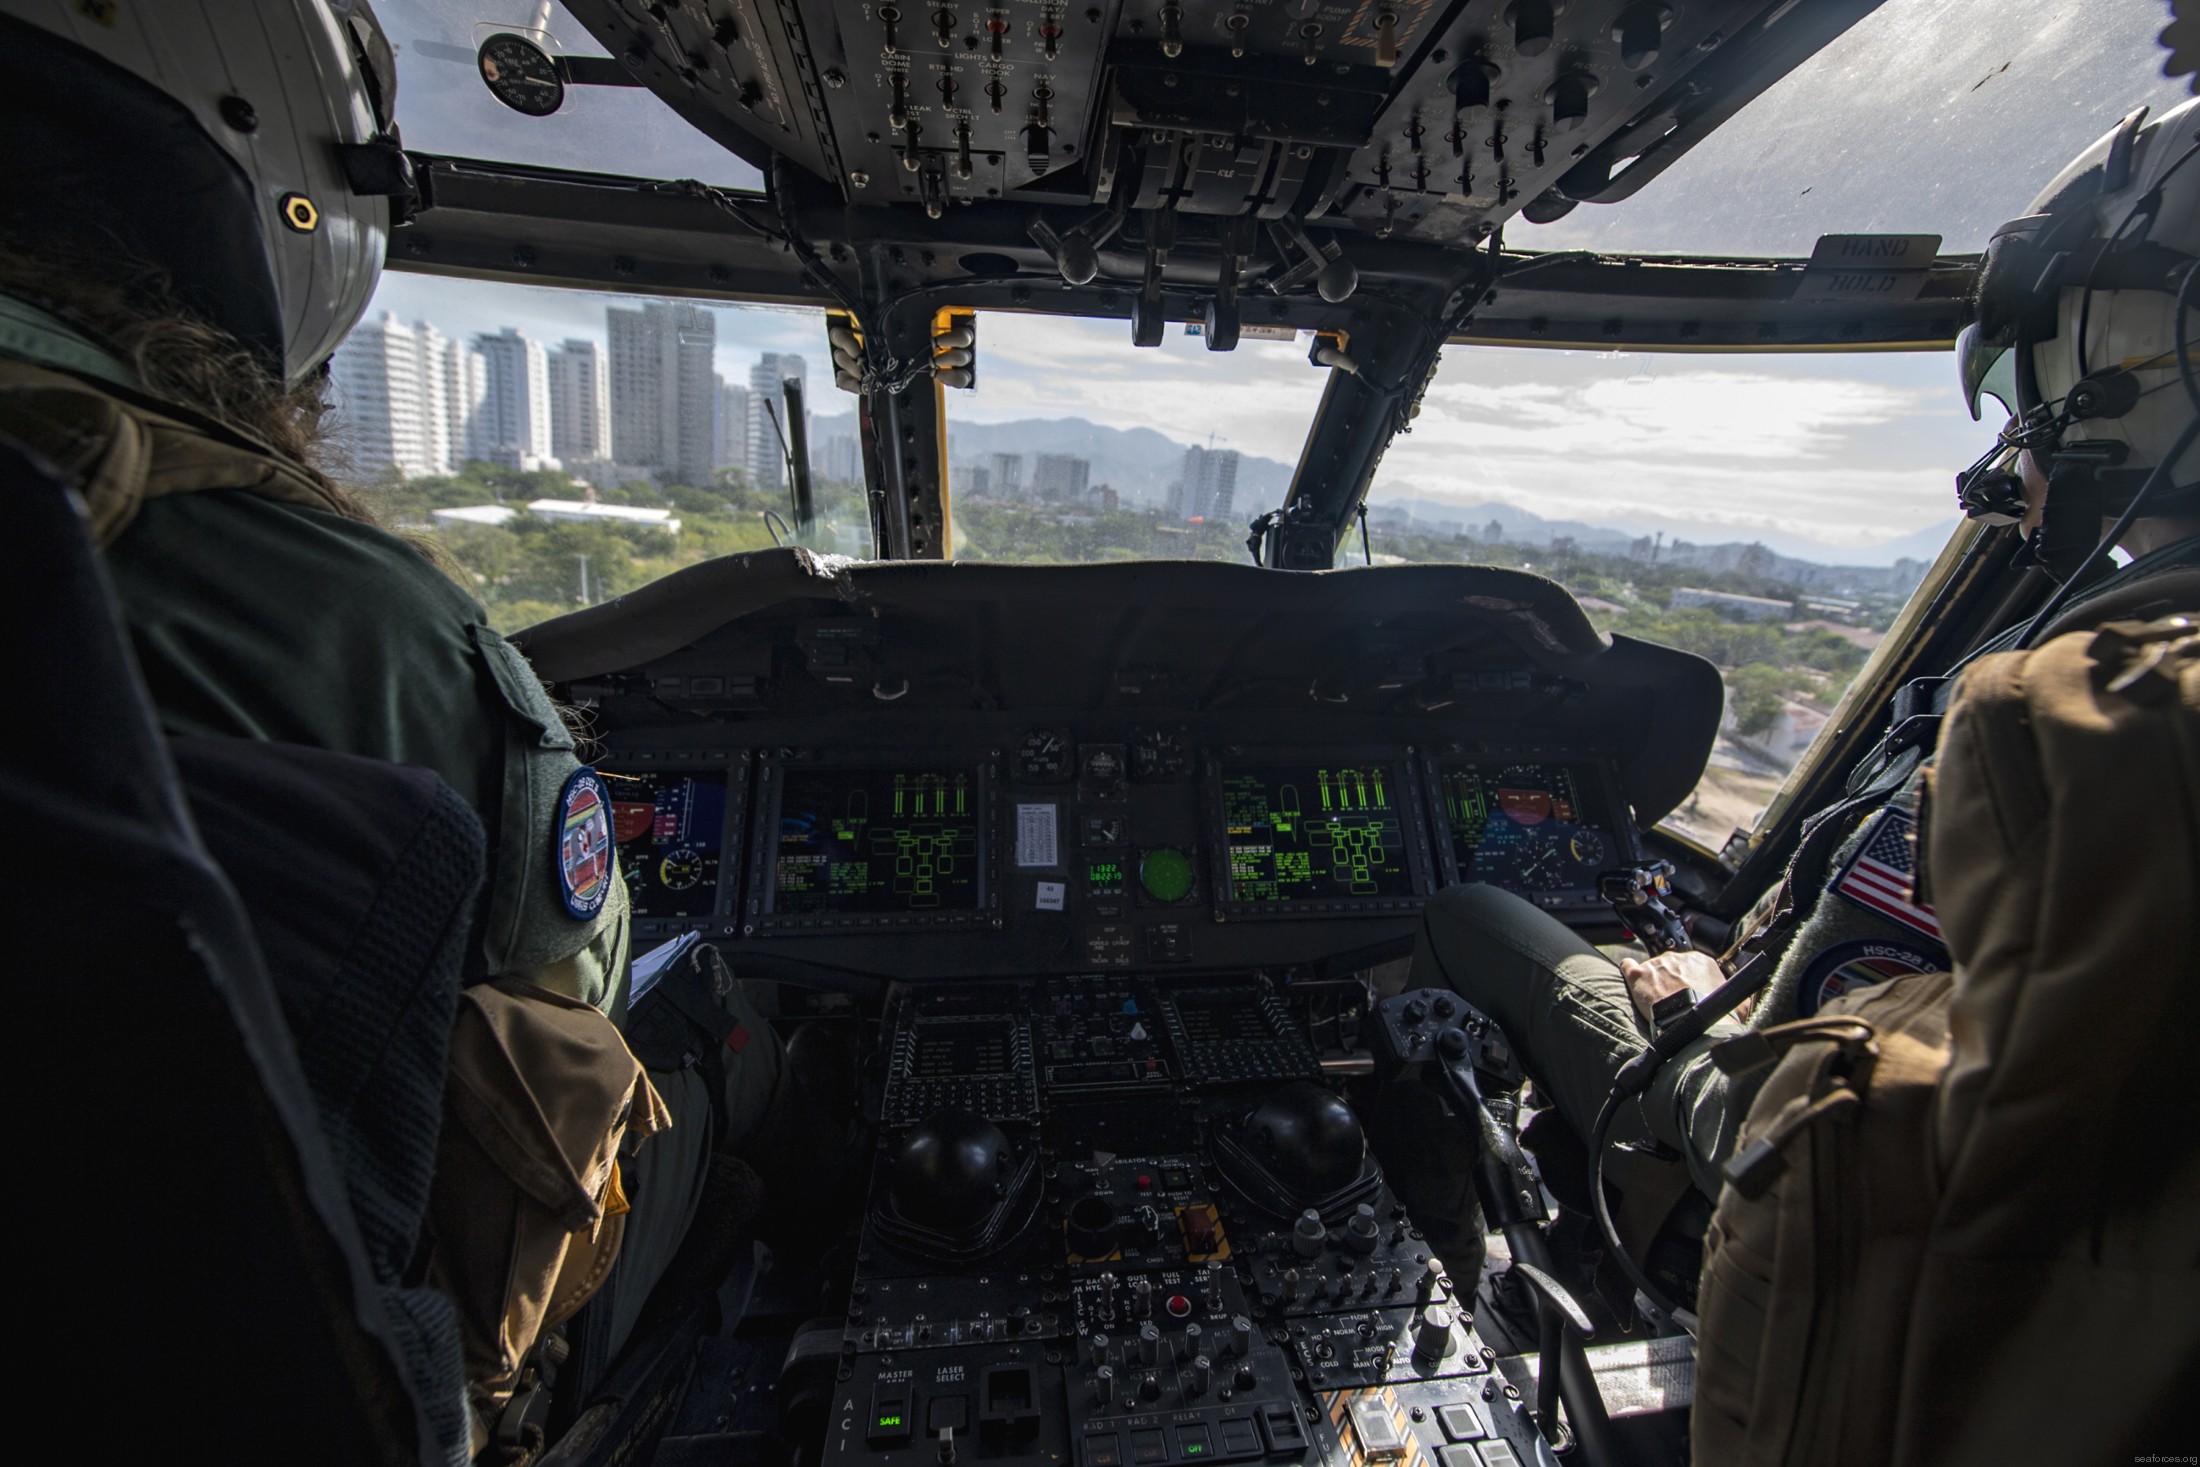 hsc-28 dragon whales helicopter sea combat squadron mh-60s seahawk us navy 183 cockpit view